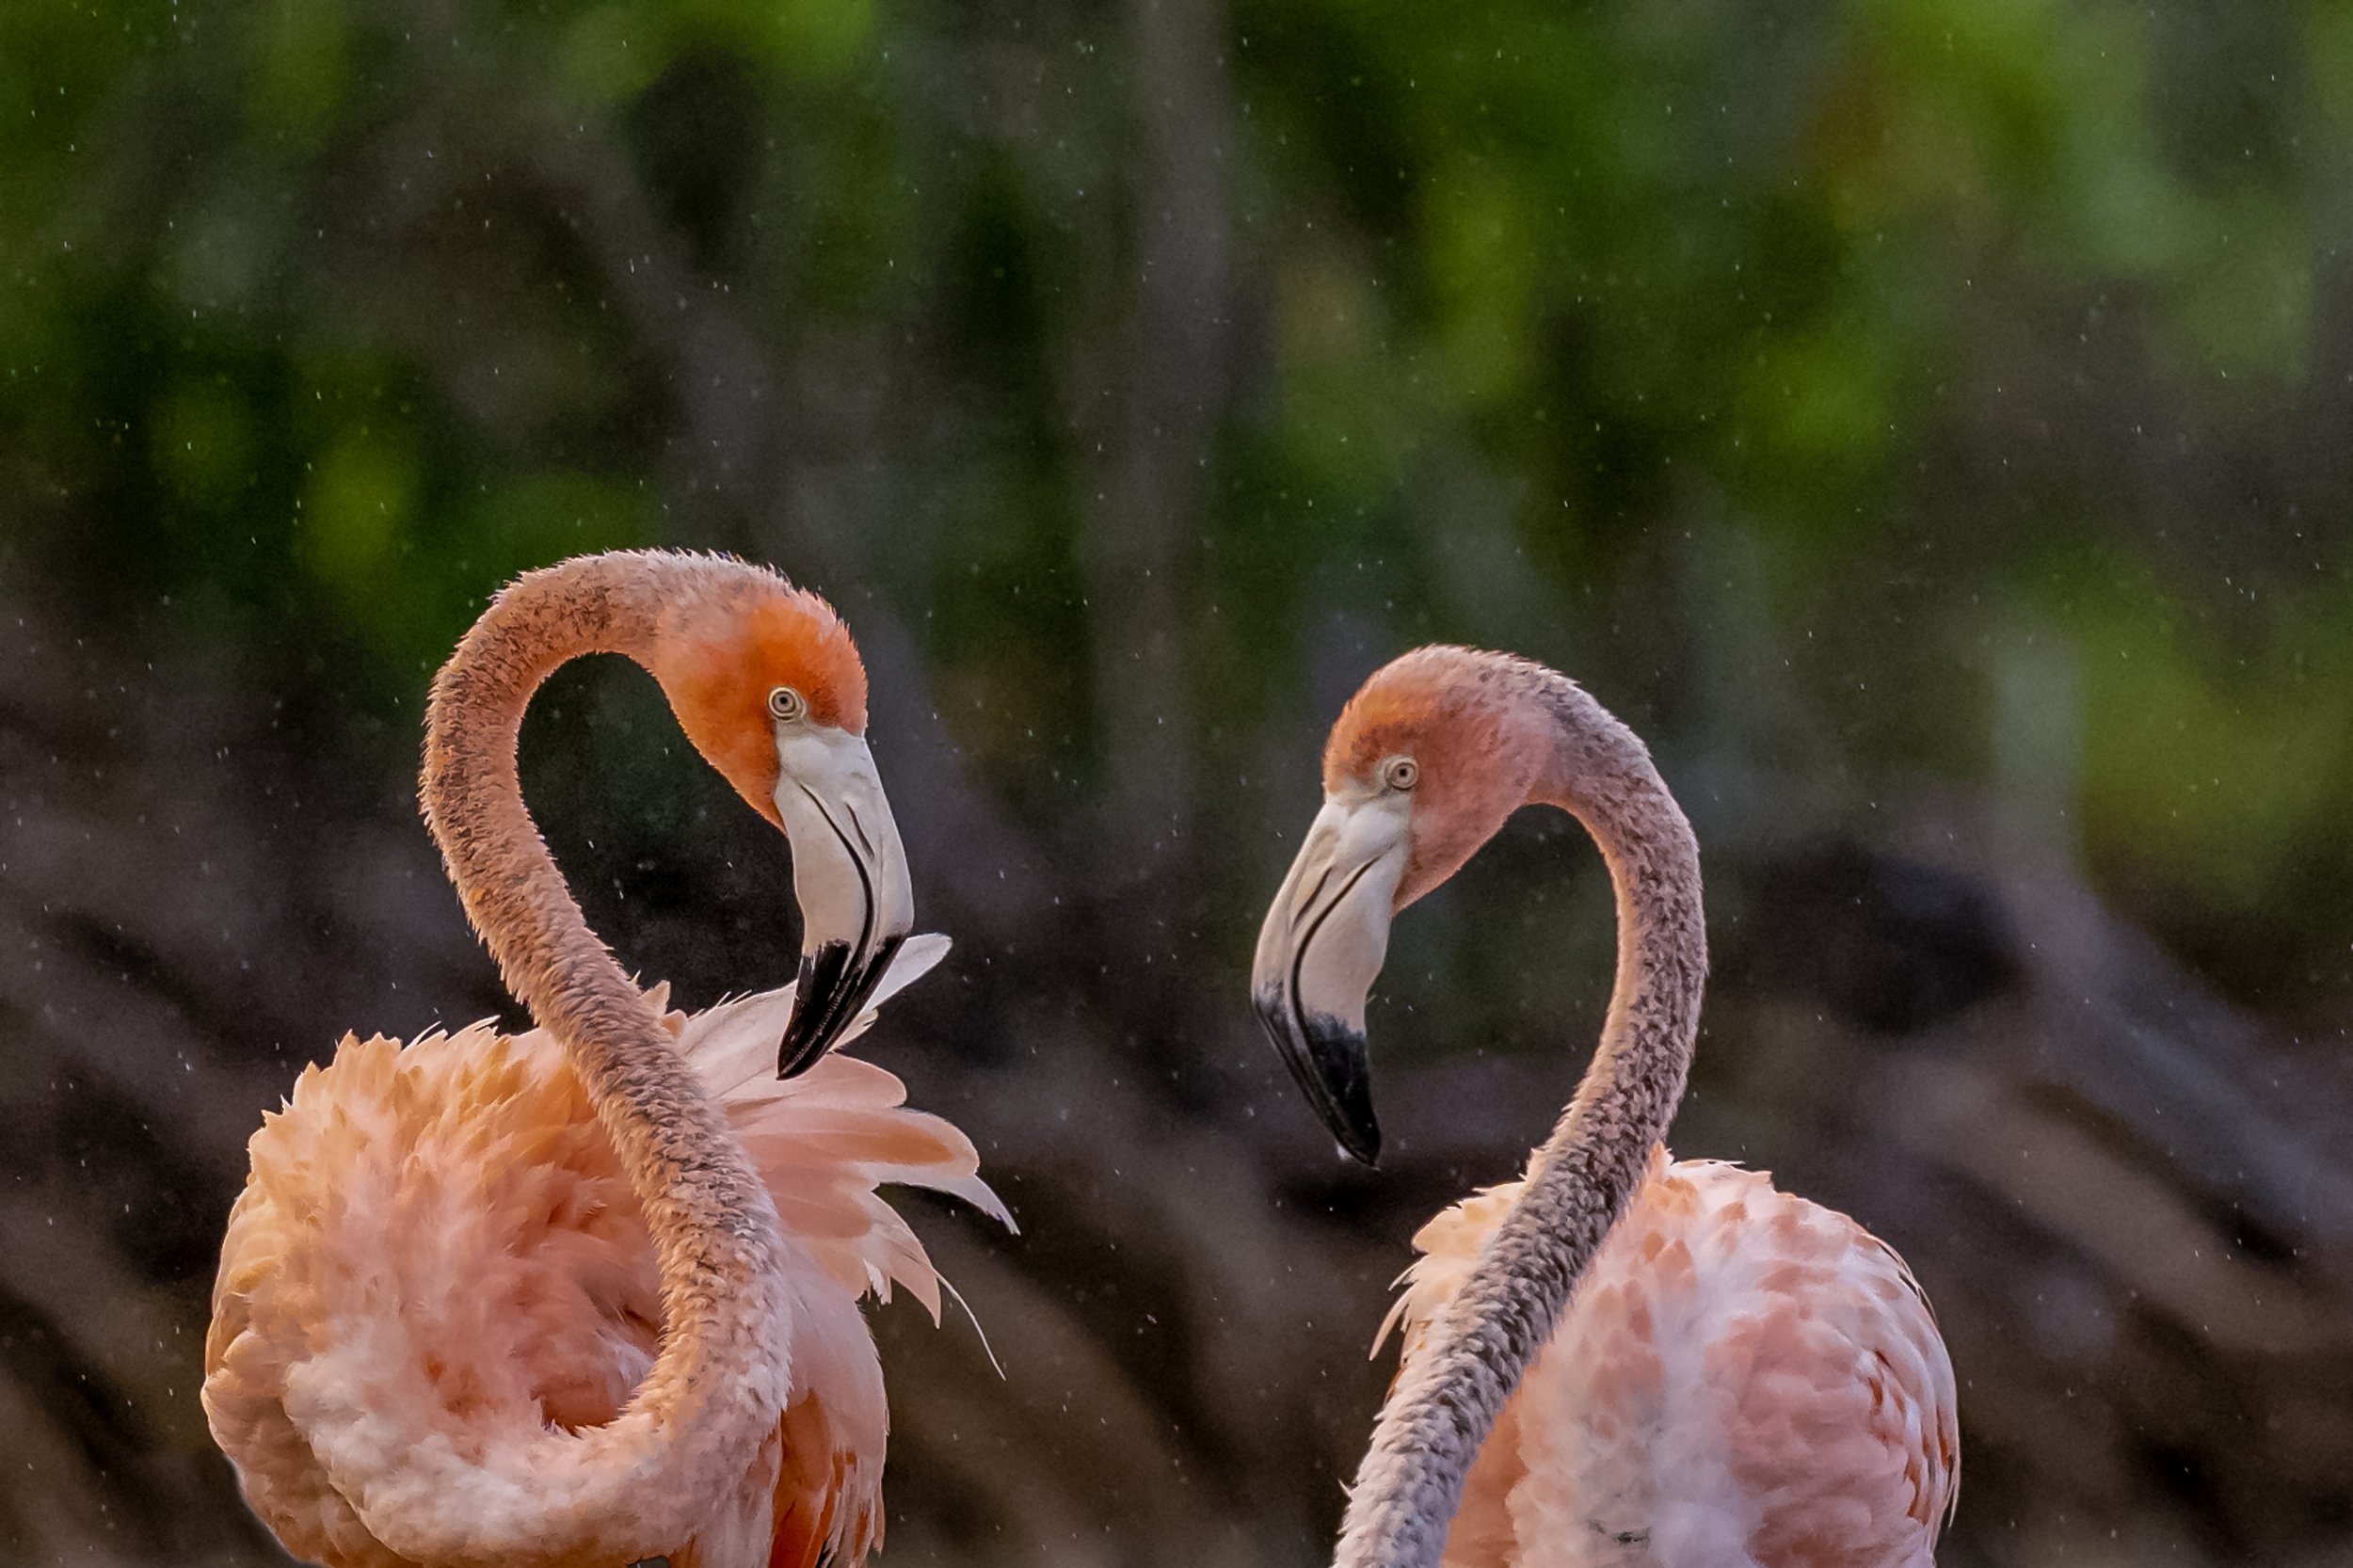  A pair of flamingos.  Image by: Nelly Quijano.  